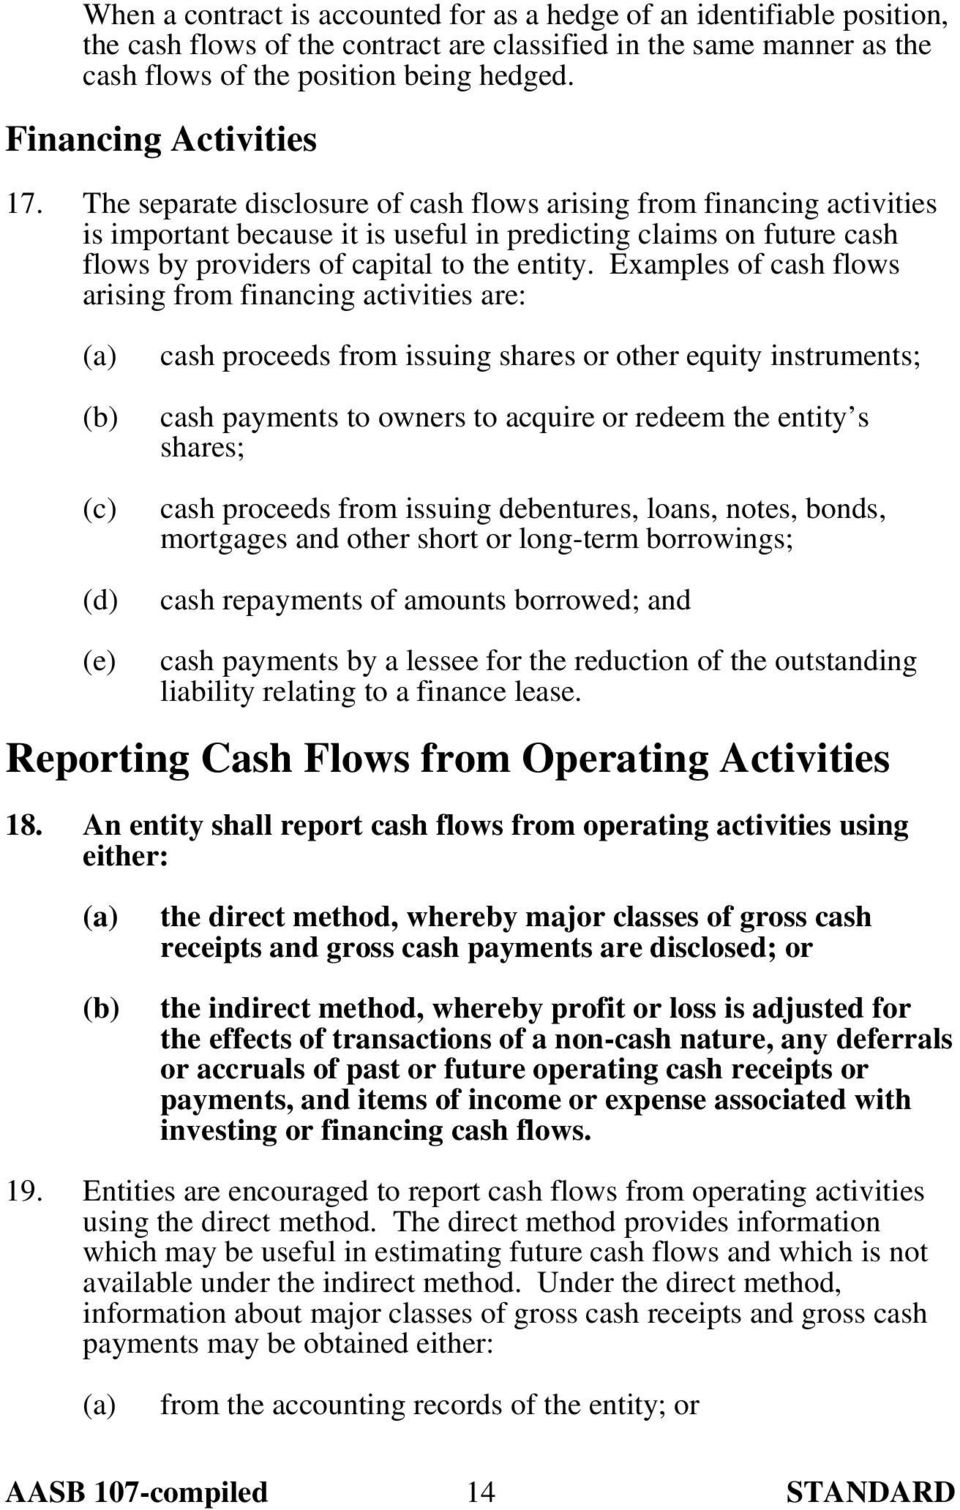 The separate disclosure of cash flows arising from financing activities is important because it is useful in predicting claims on future cash flows by providers of capital to the entity.